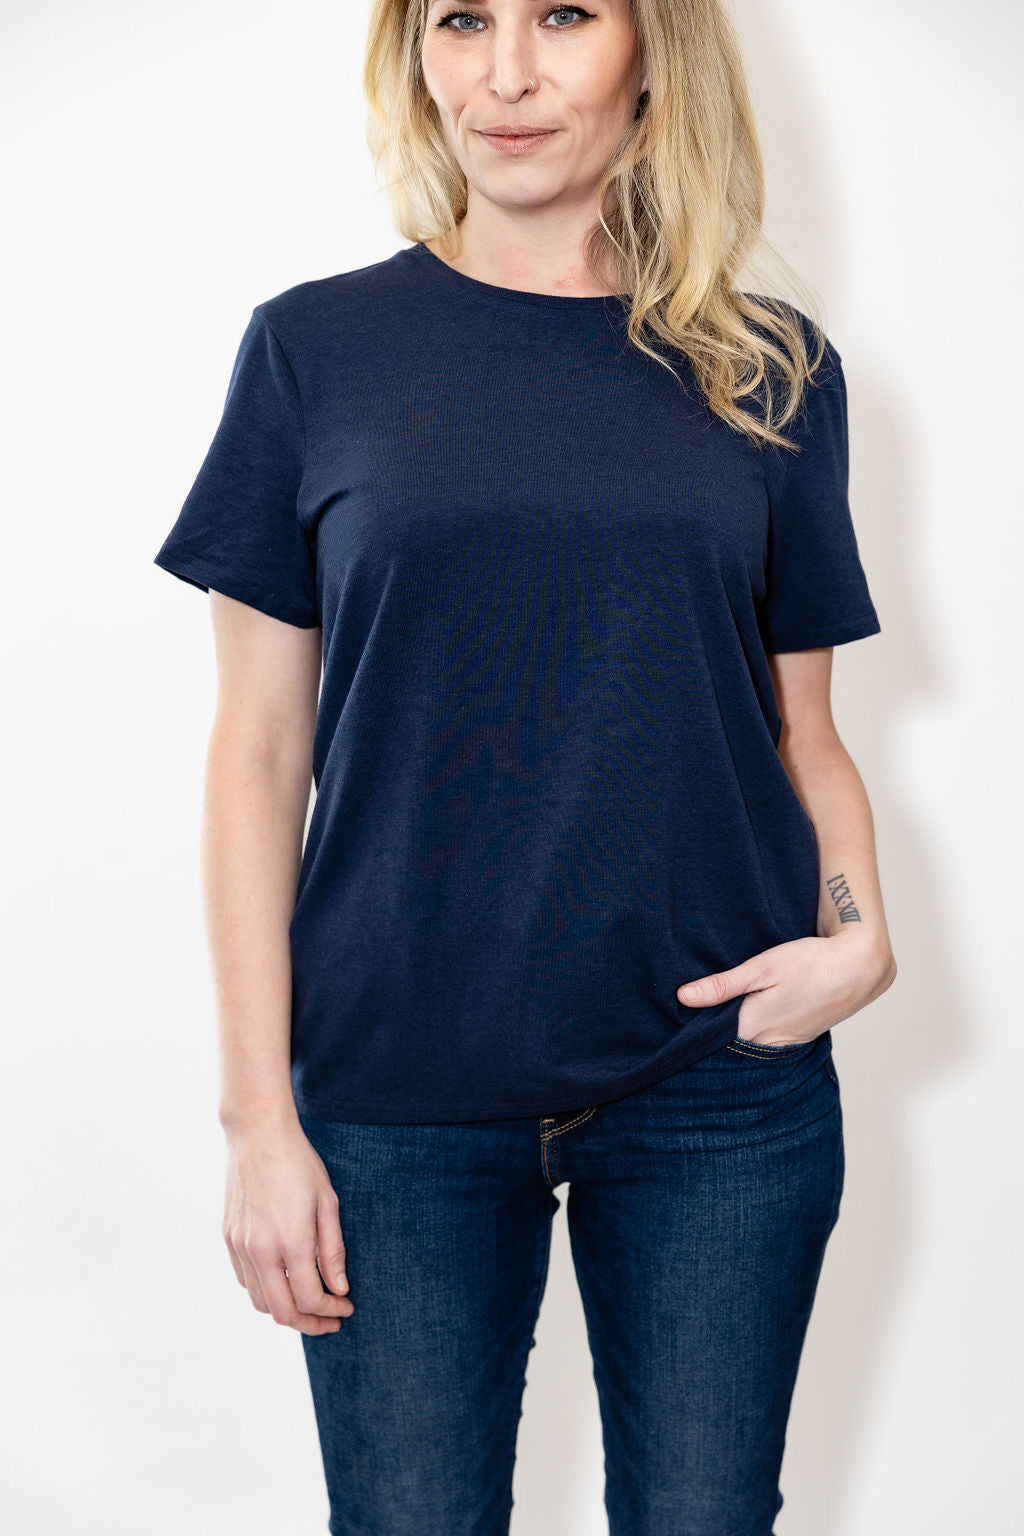 Our So Soft to the touch T-shirt  / Made in Canada